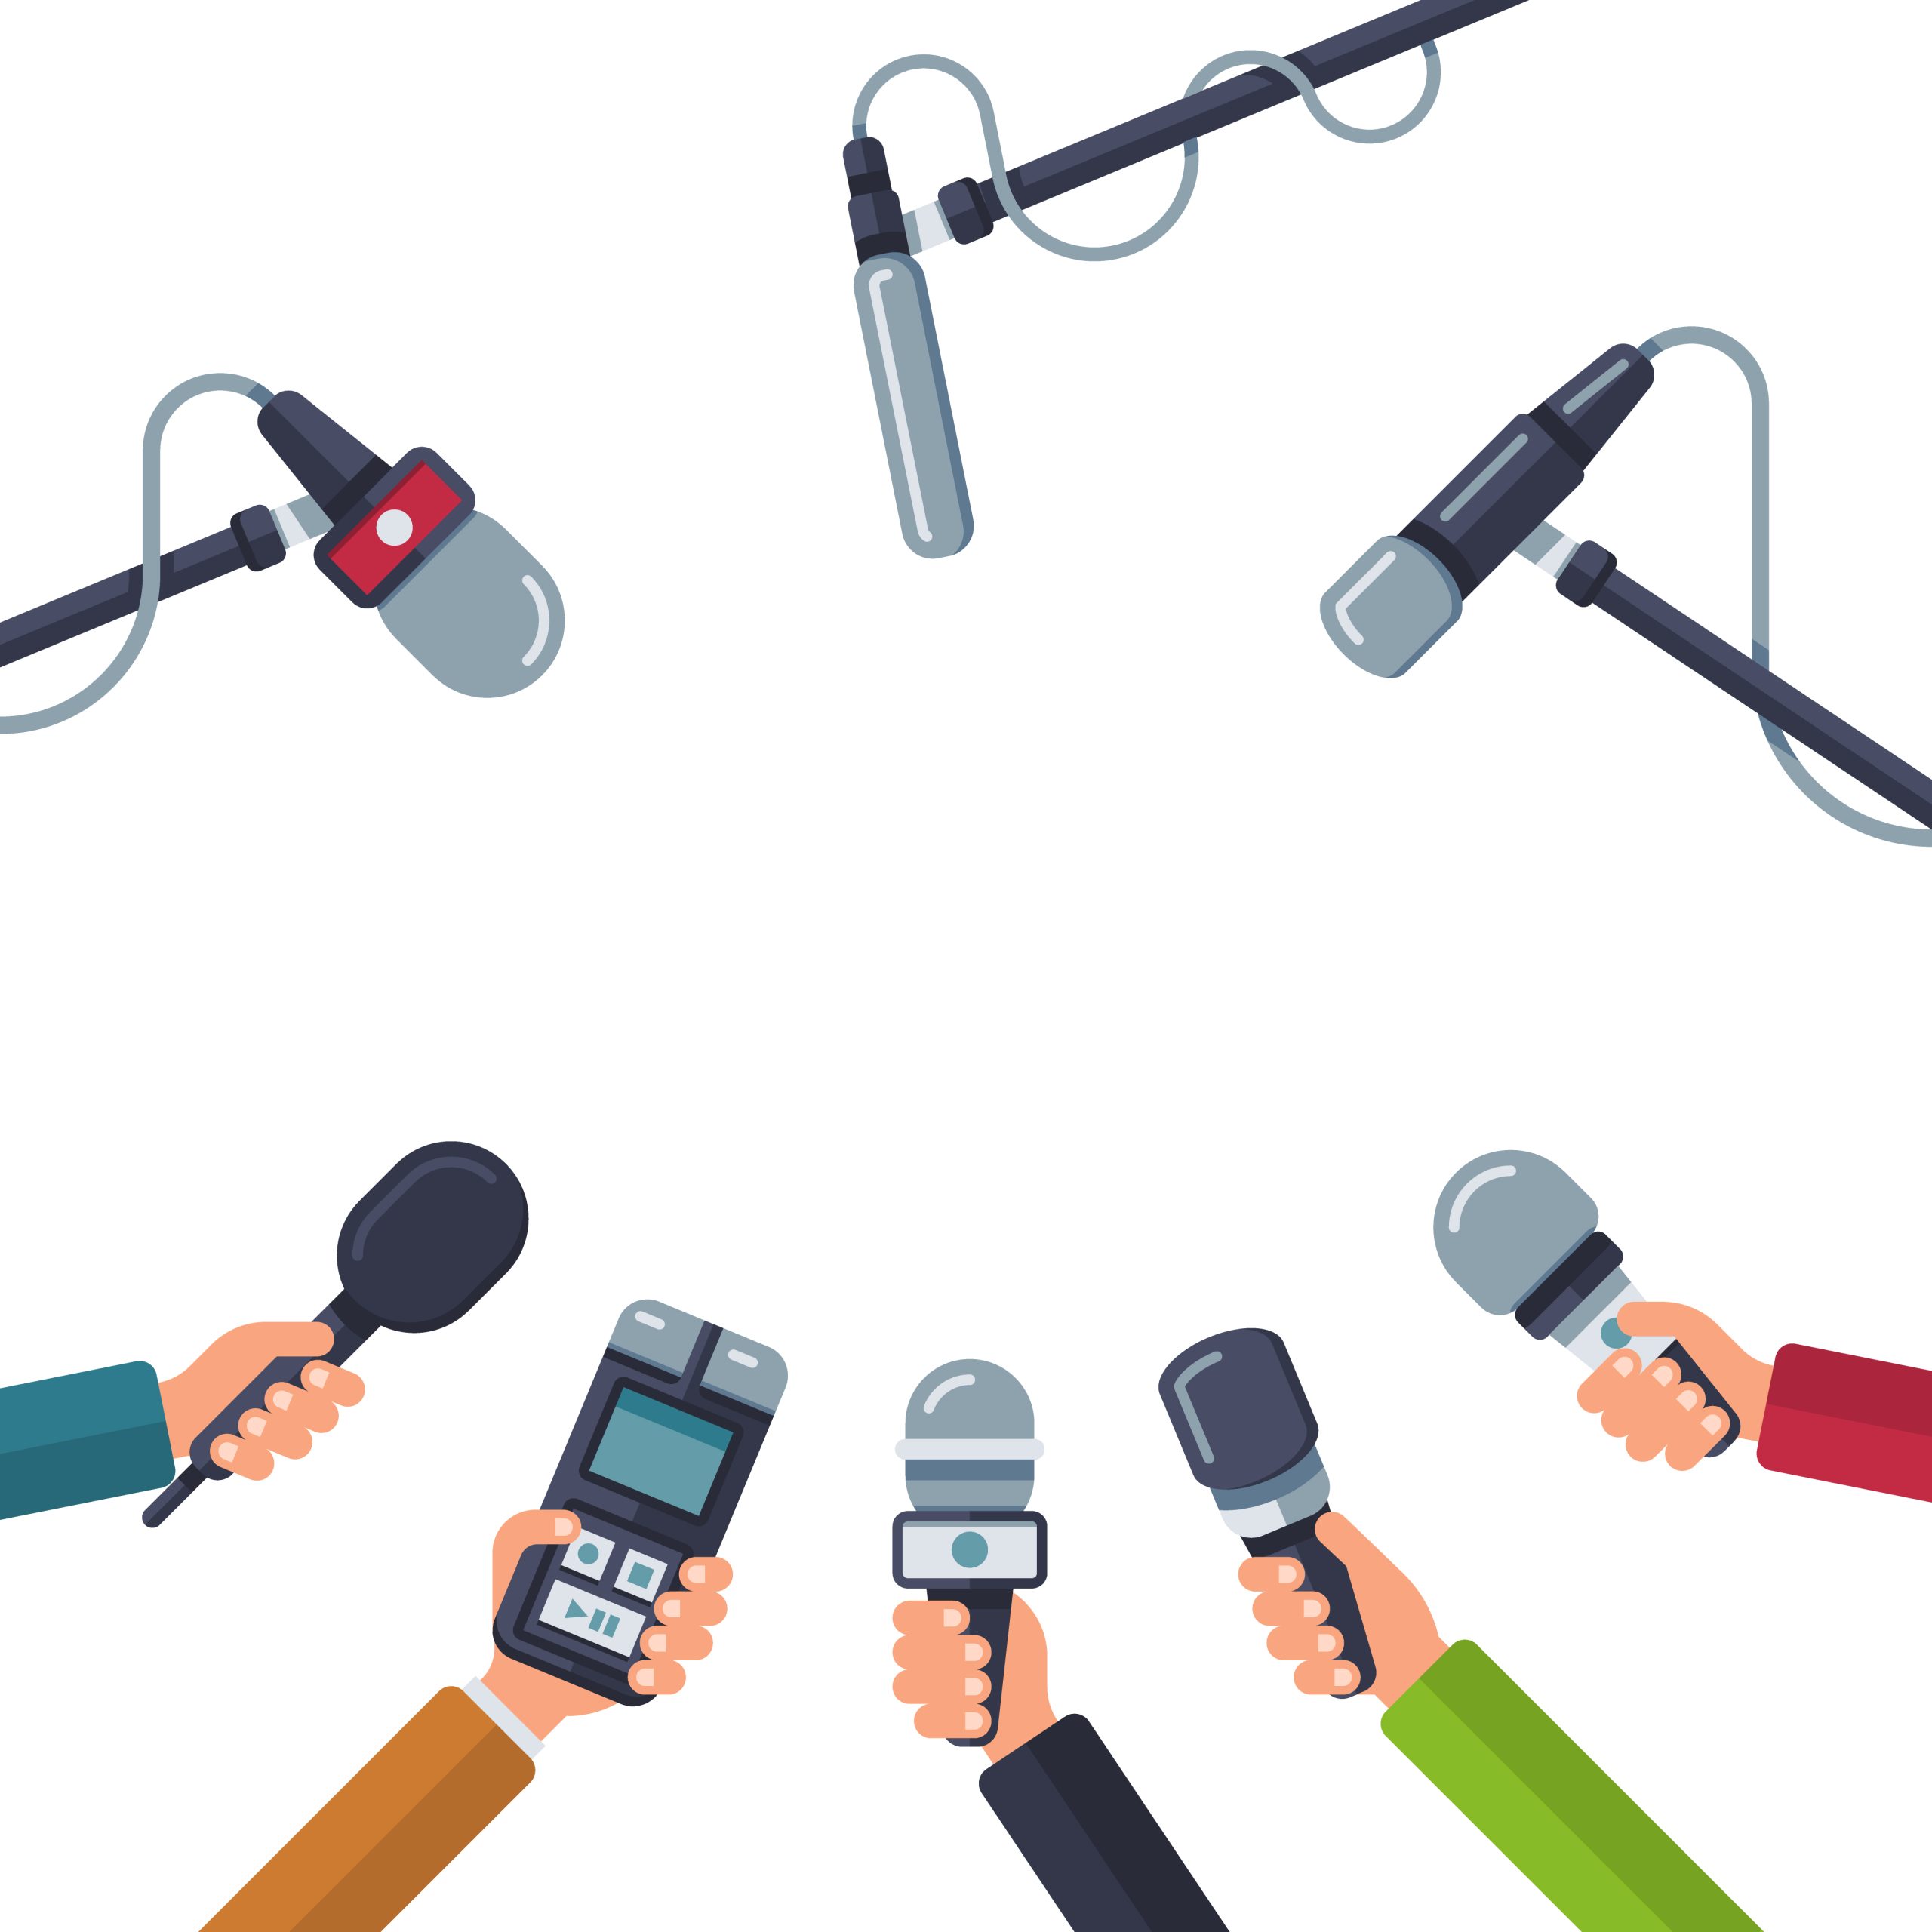 Hands holding microphones, press conference vector. Concept media press, reporter with dictaphone illustration